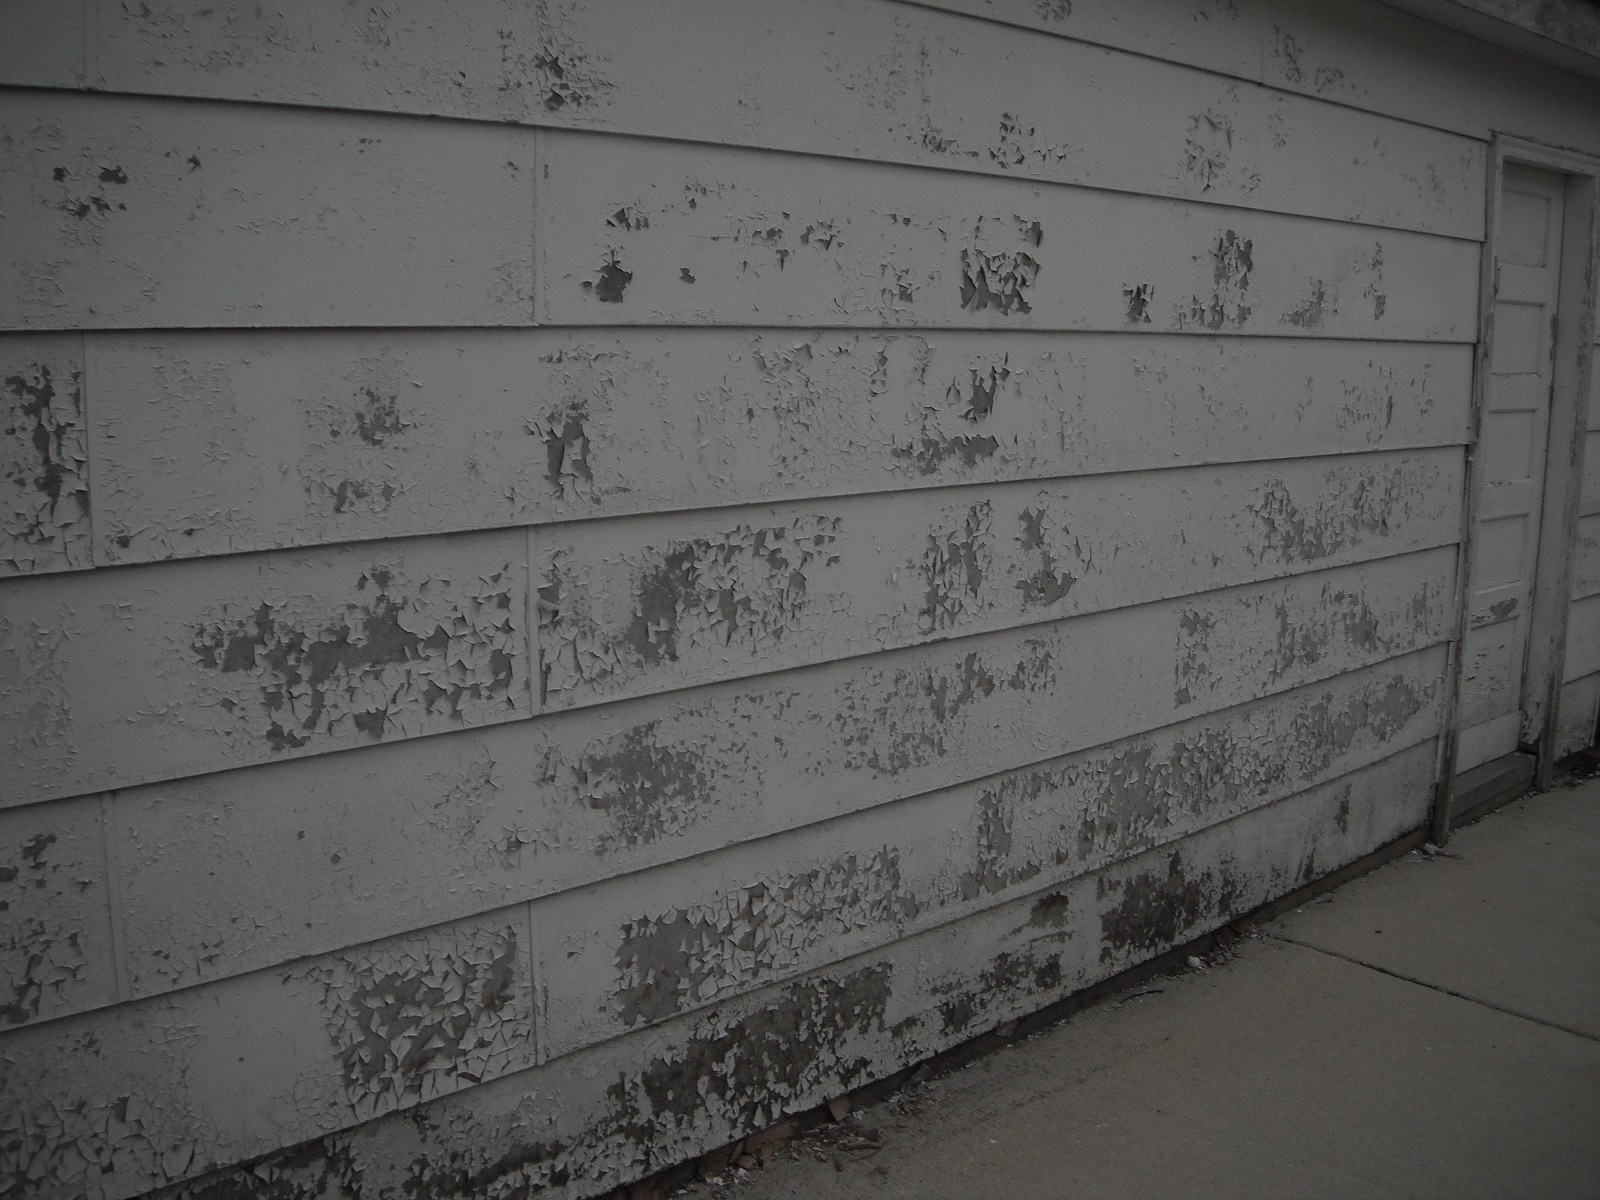 Severly peeling paint on the siding. "Oak Forest Home Inspection"